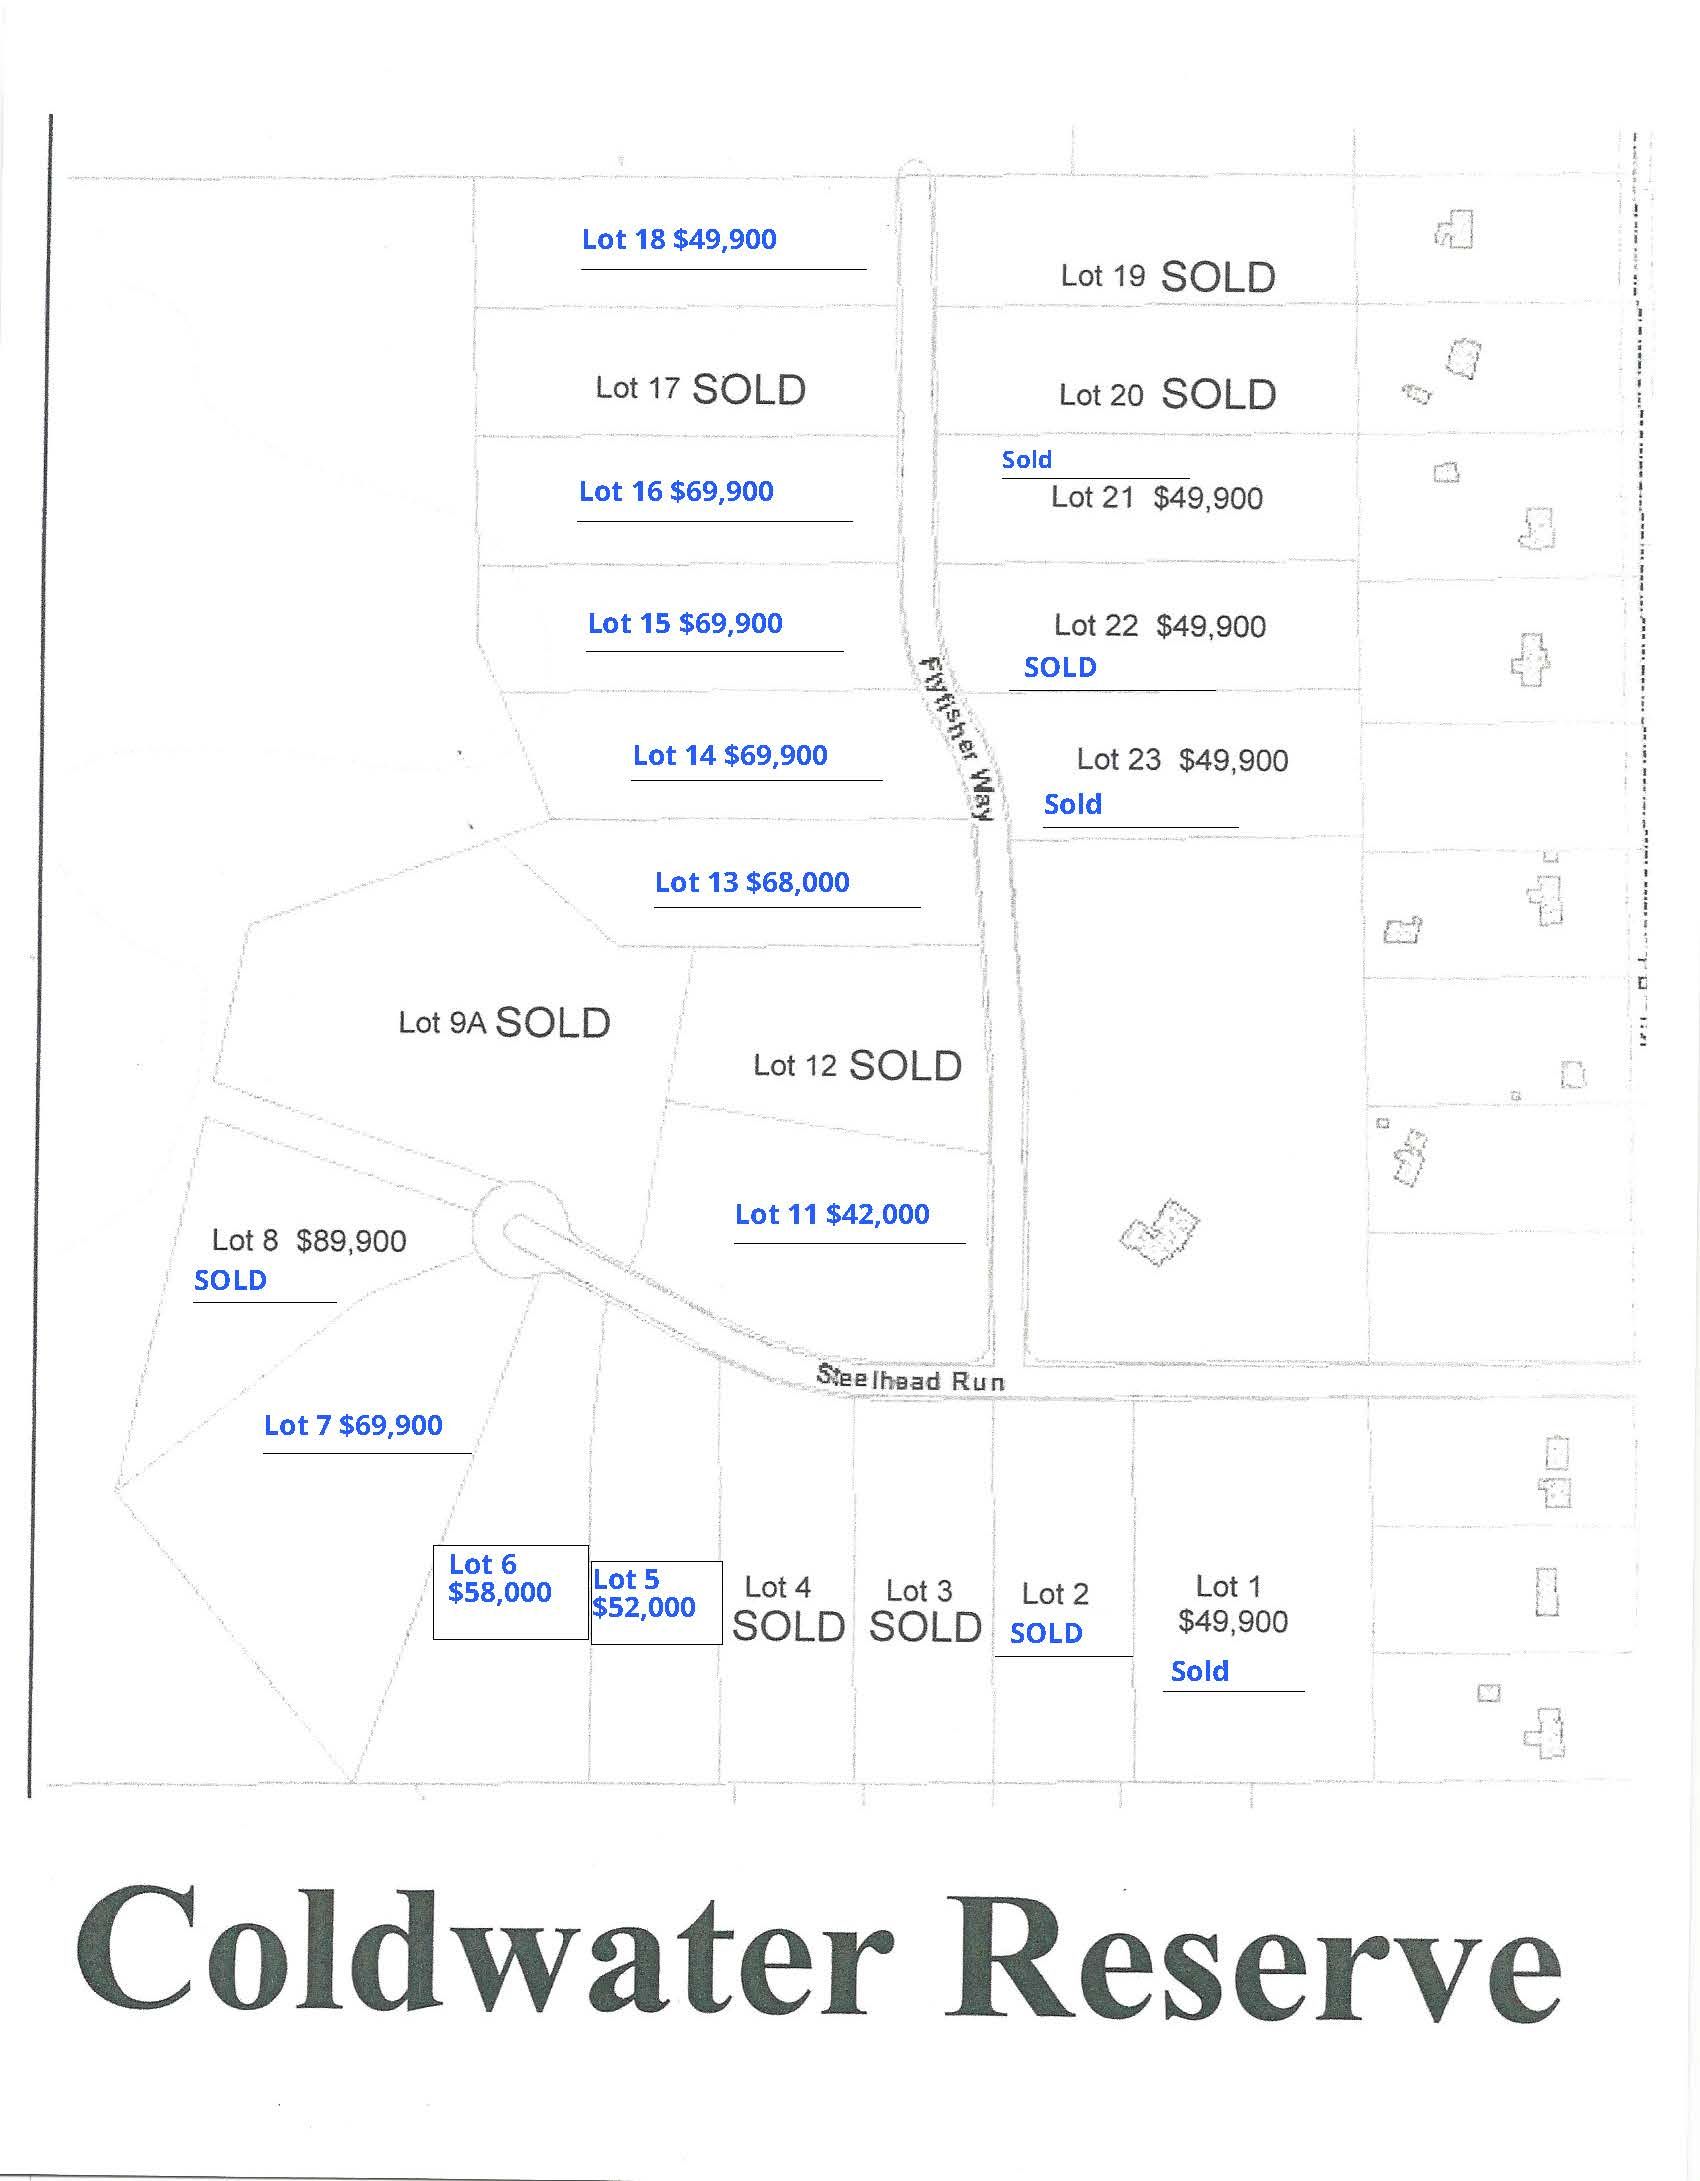 Coldwater Reserve,44024